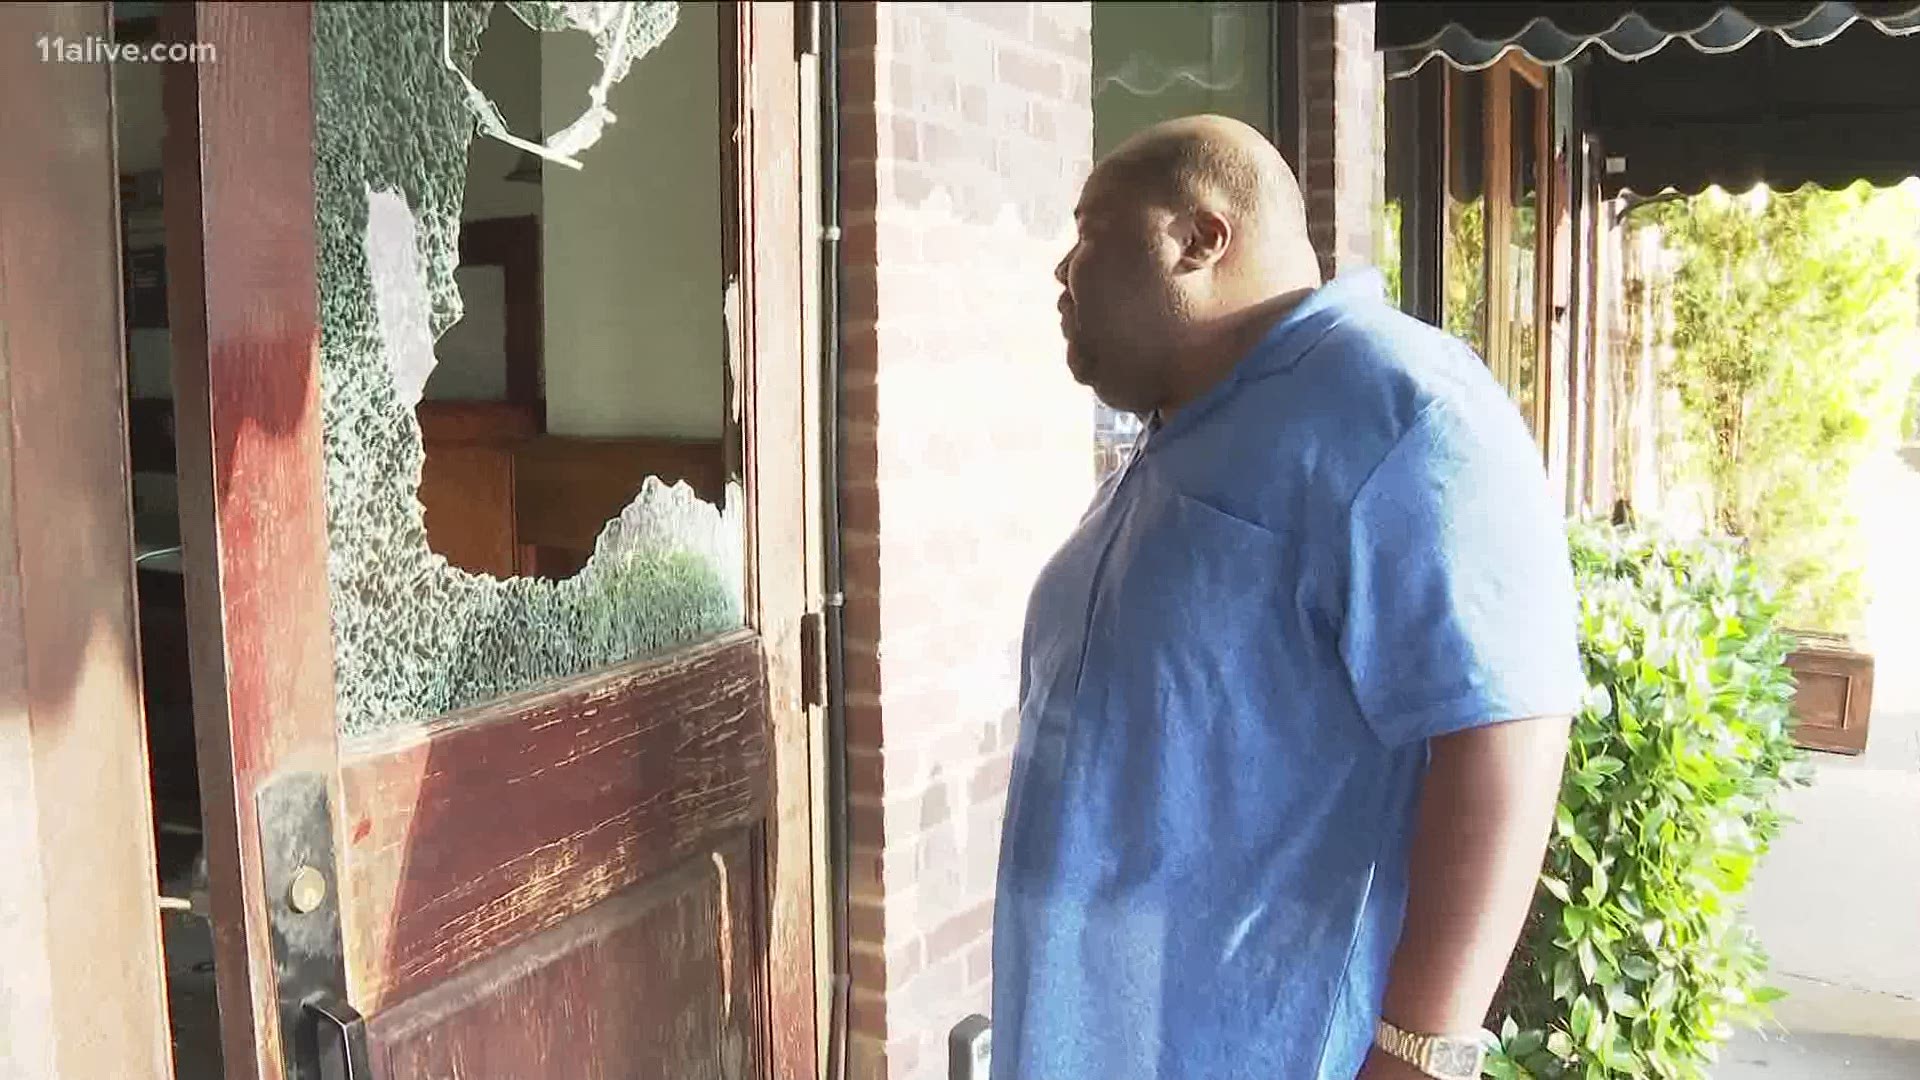 Business owners in Buckhead returned to their damaged building to find volunteers ready to help clean.